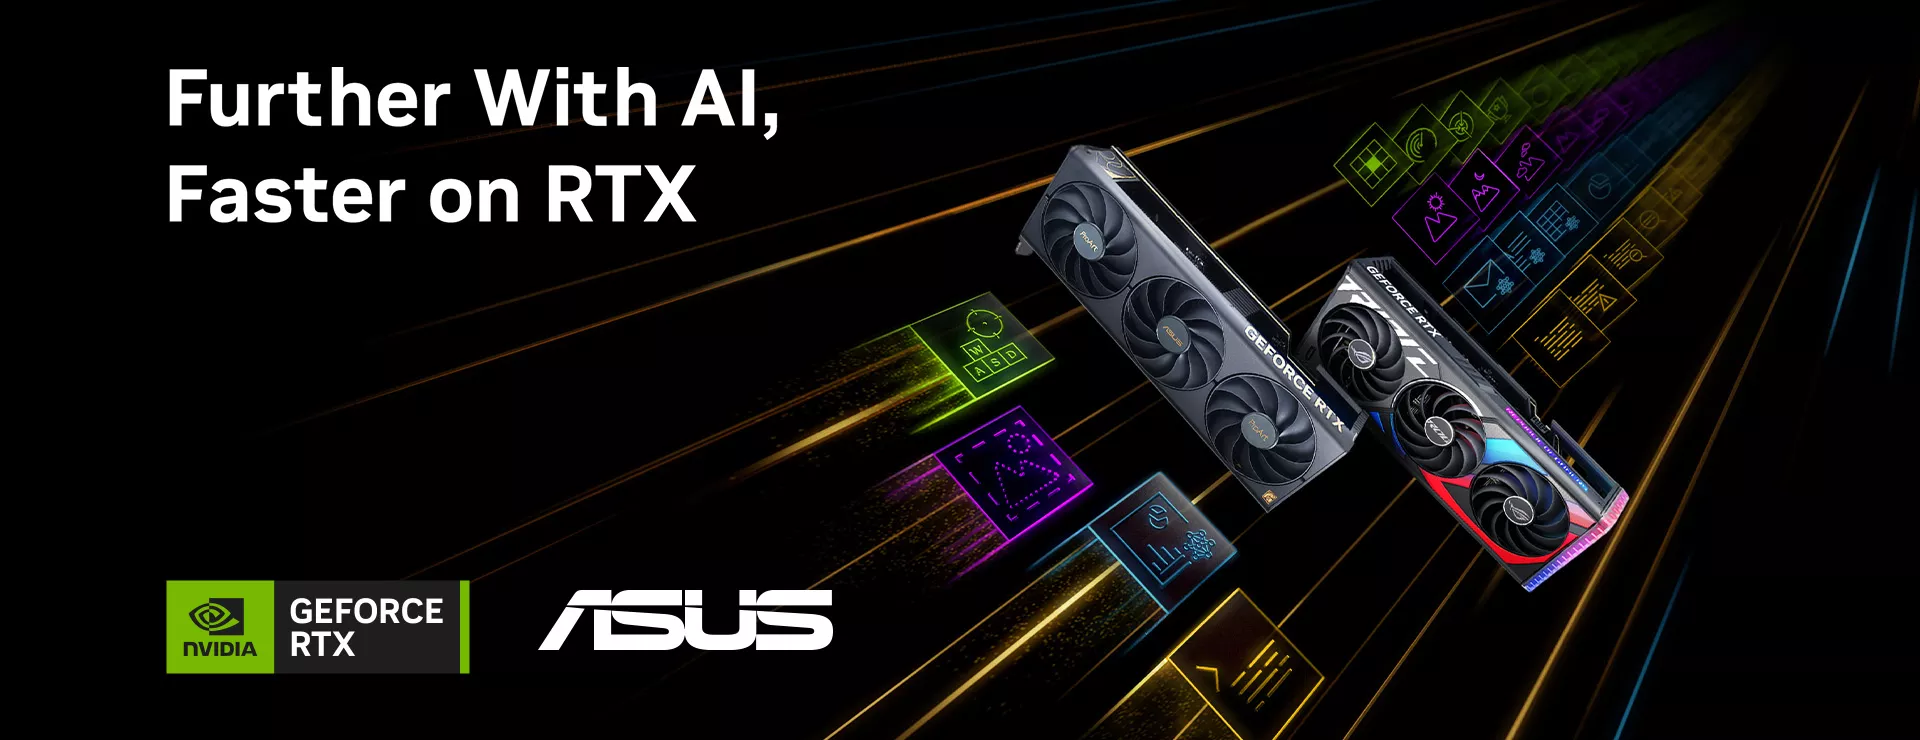 ProArt and ROG Strix graphics card shown floating with icons of NVIDIA tech in the background